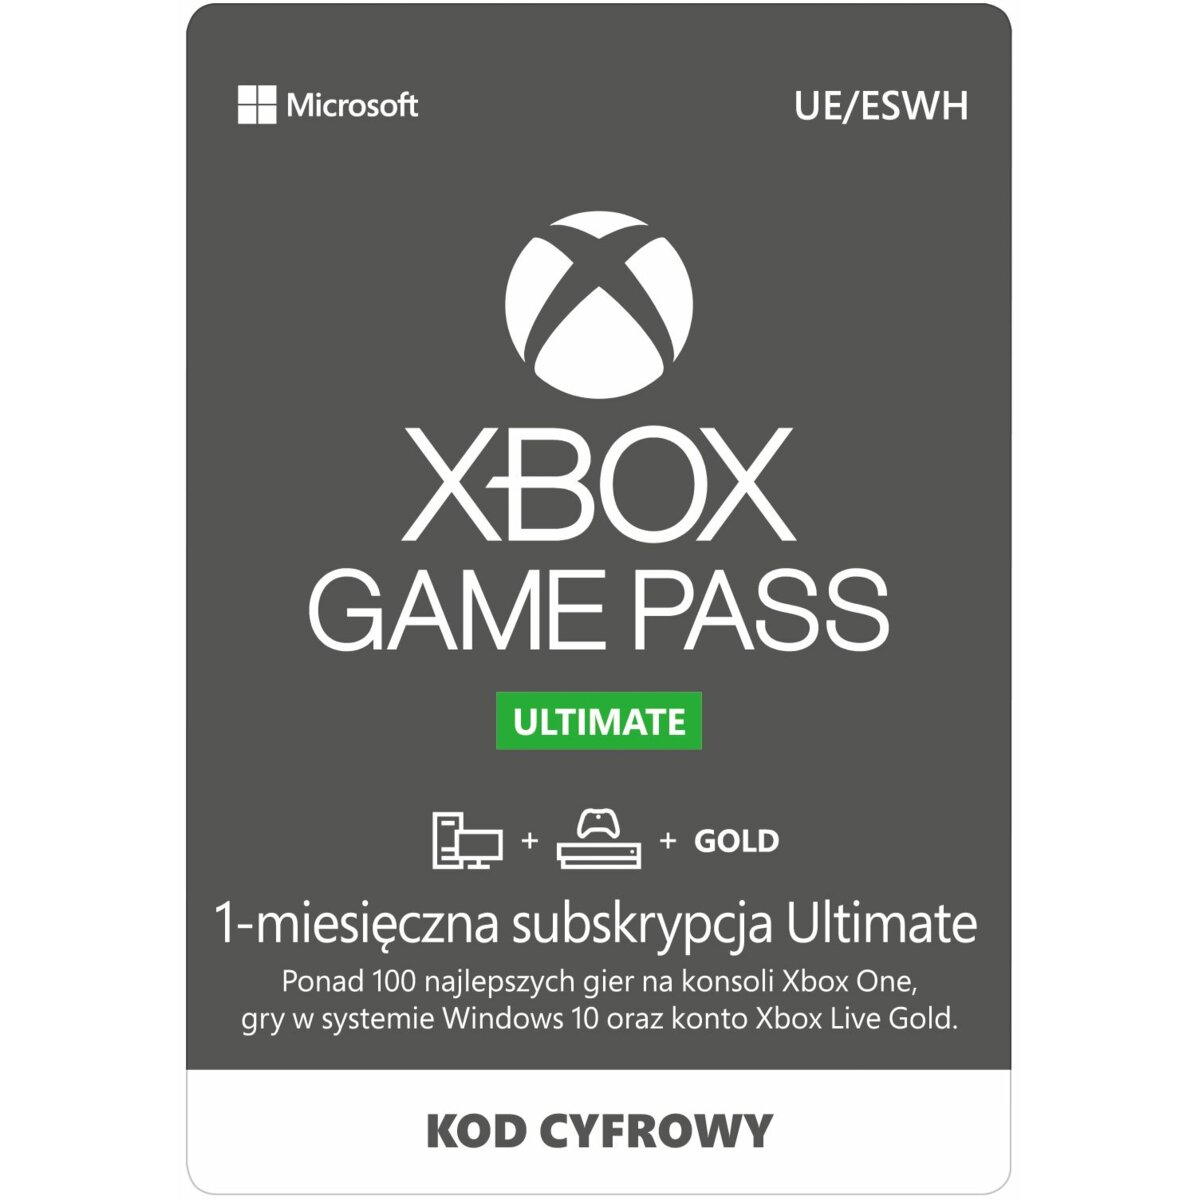 xbox game pass ultimate 12 month price